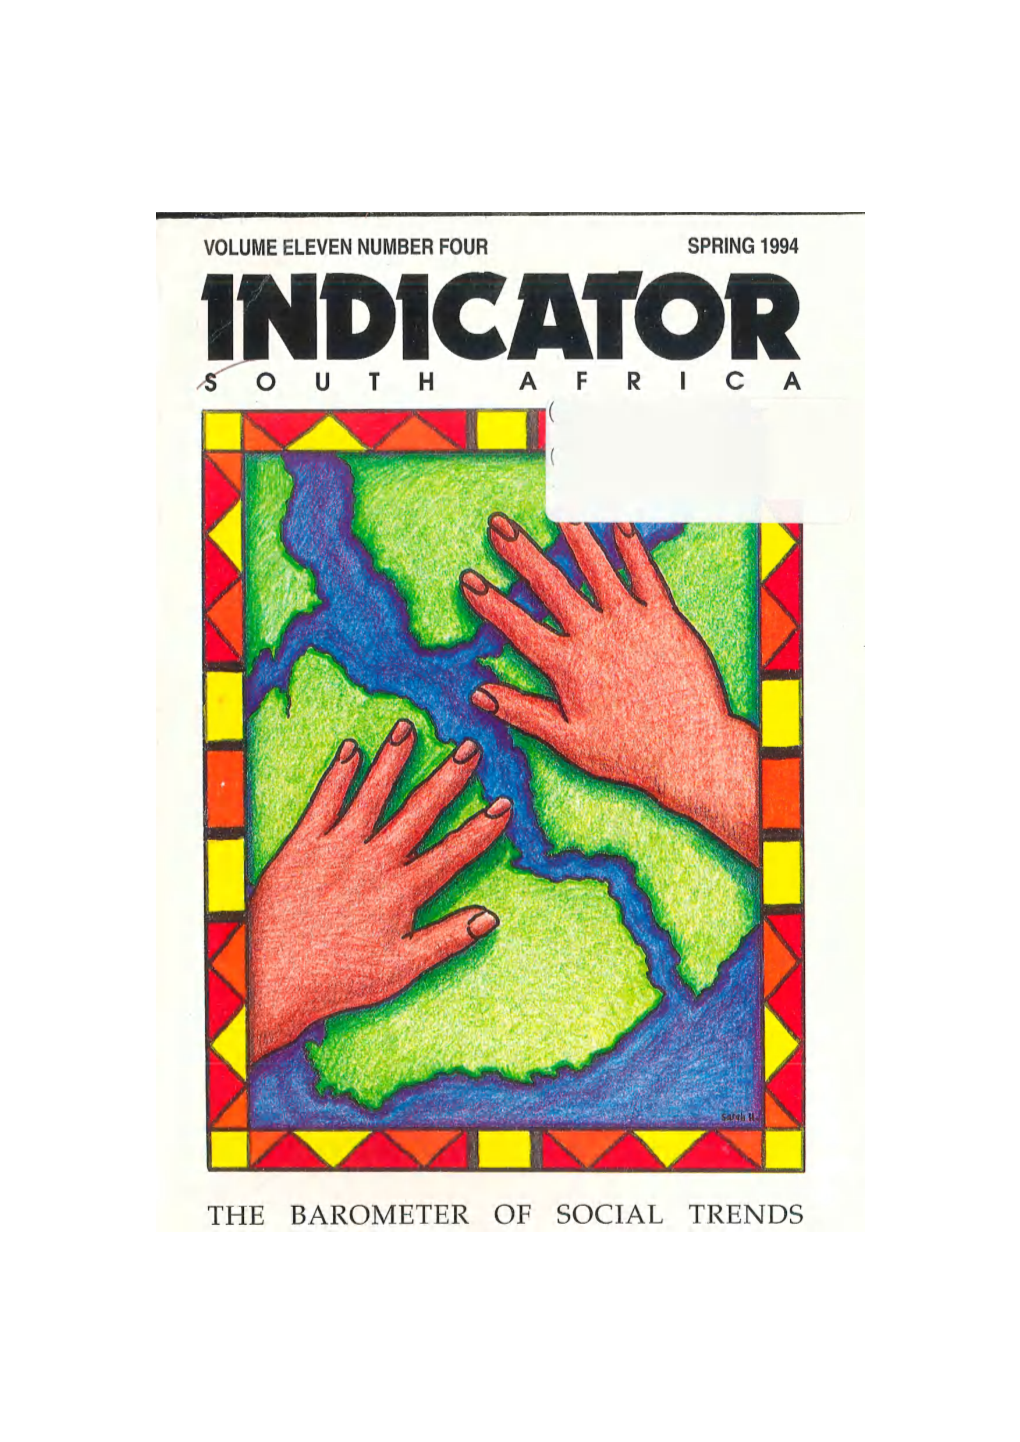 INDICATOR PROJECT SOUTH AFRICA Centre for Social and Development Studies University of Natal • King George V Ave • Durban • 4001 • Tel